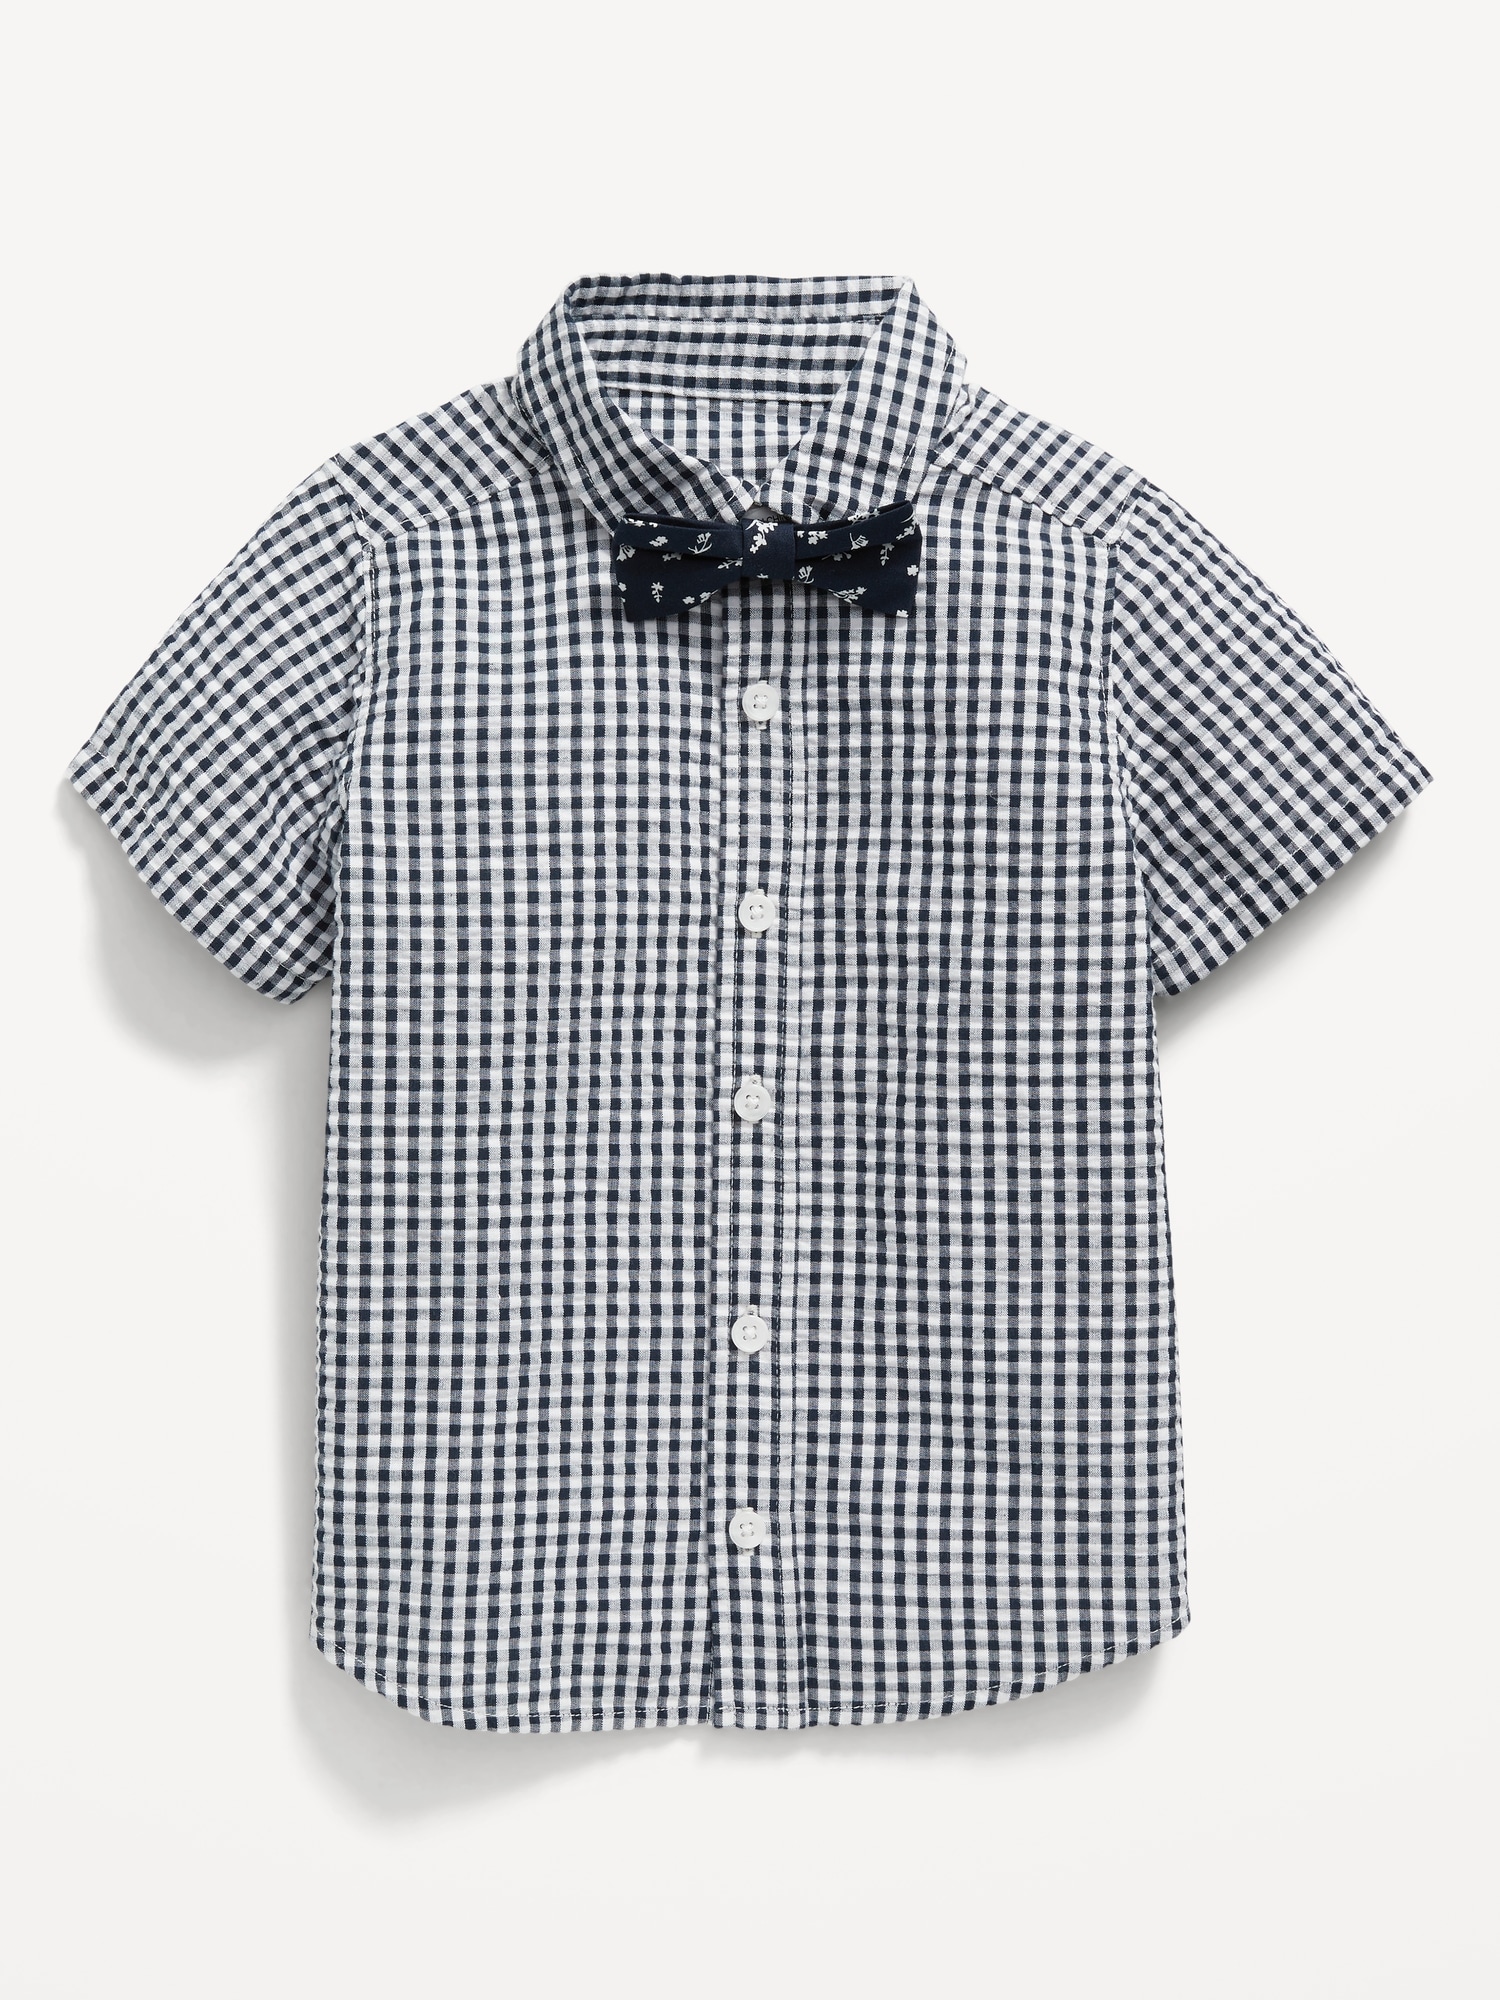 Short-Sleeve Printed Shirt & Bow-Tie Set for Toddler Boys | Old Navy